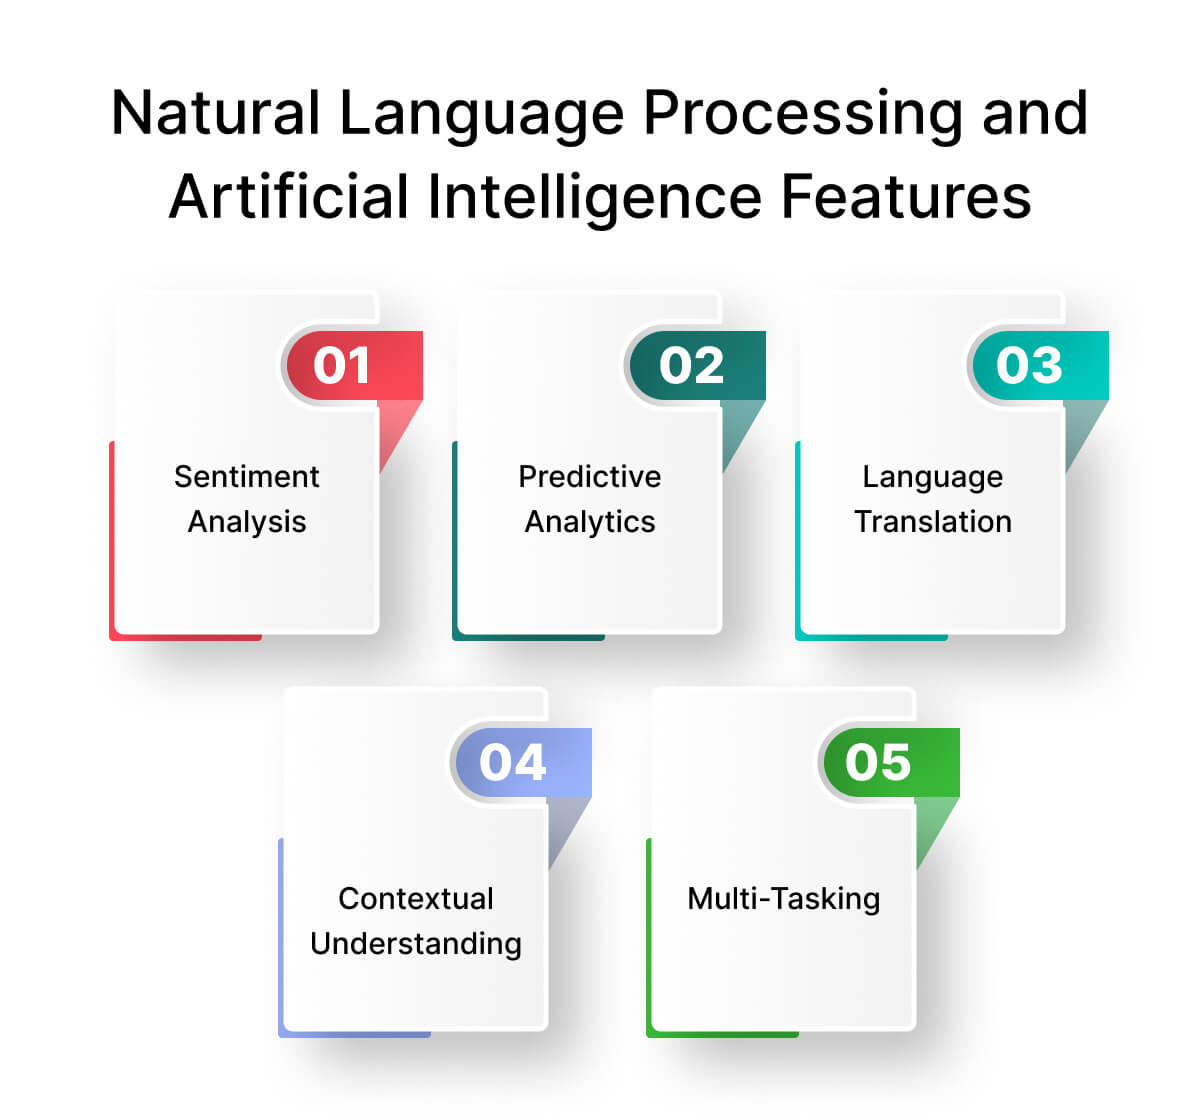 Natural Language Processing and Artificial Intelligence Features